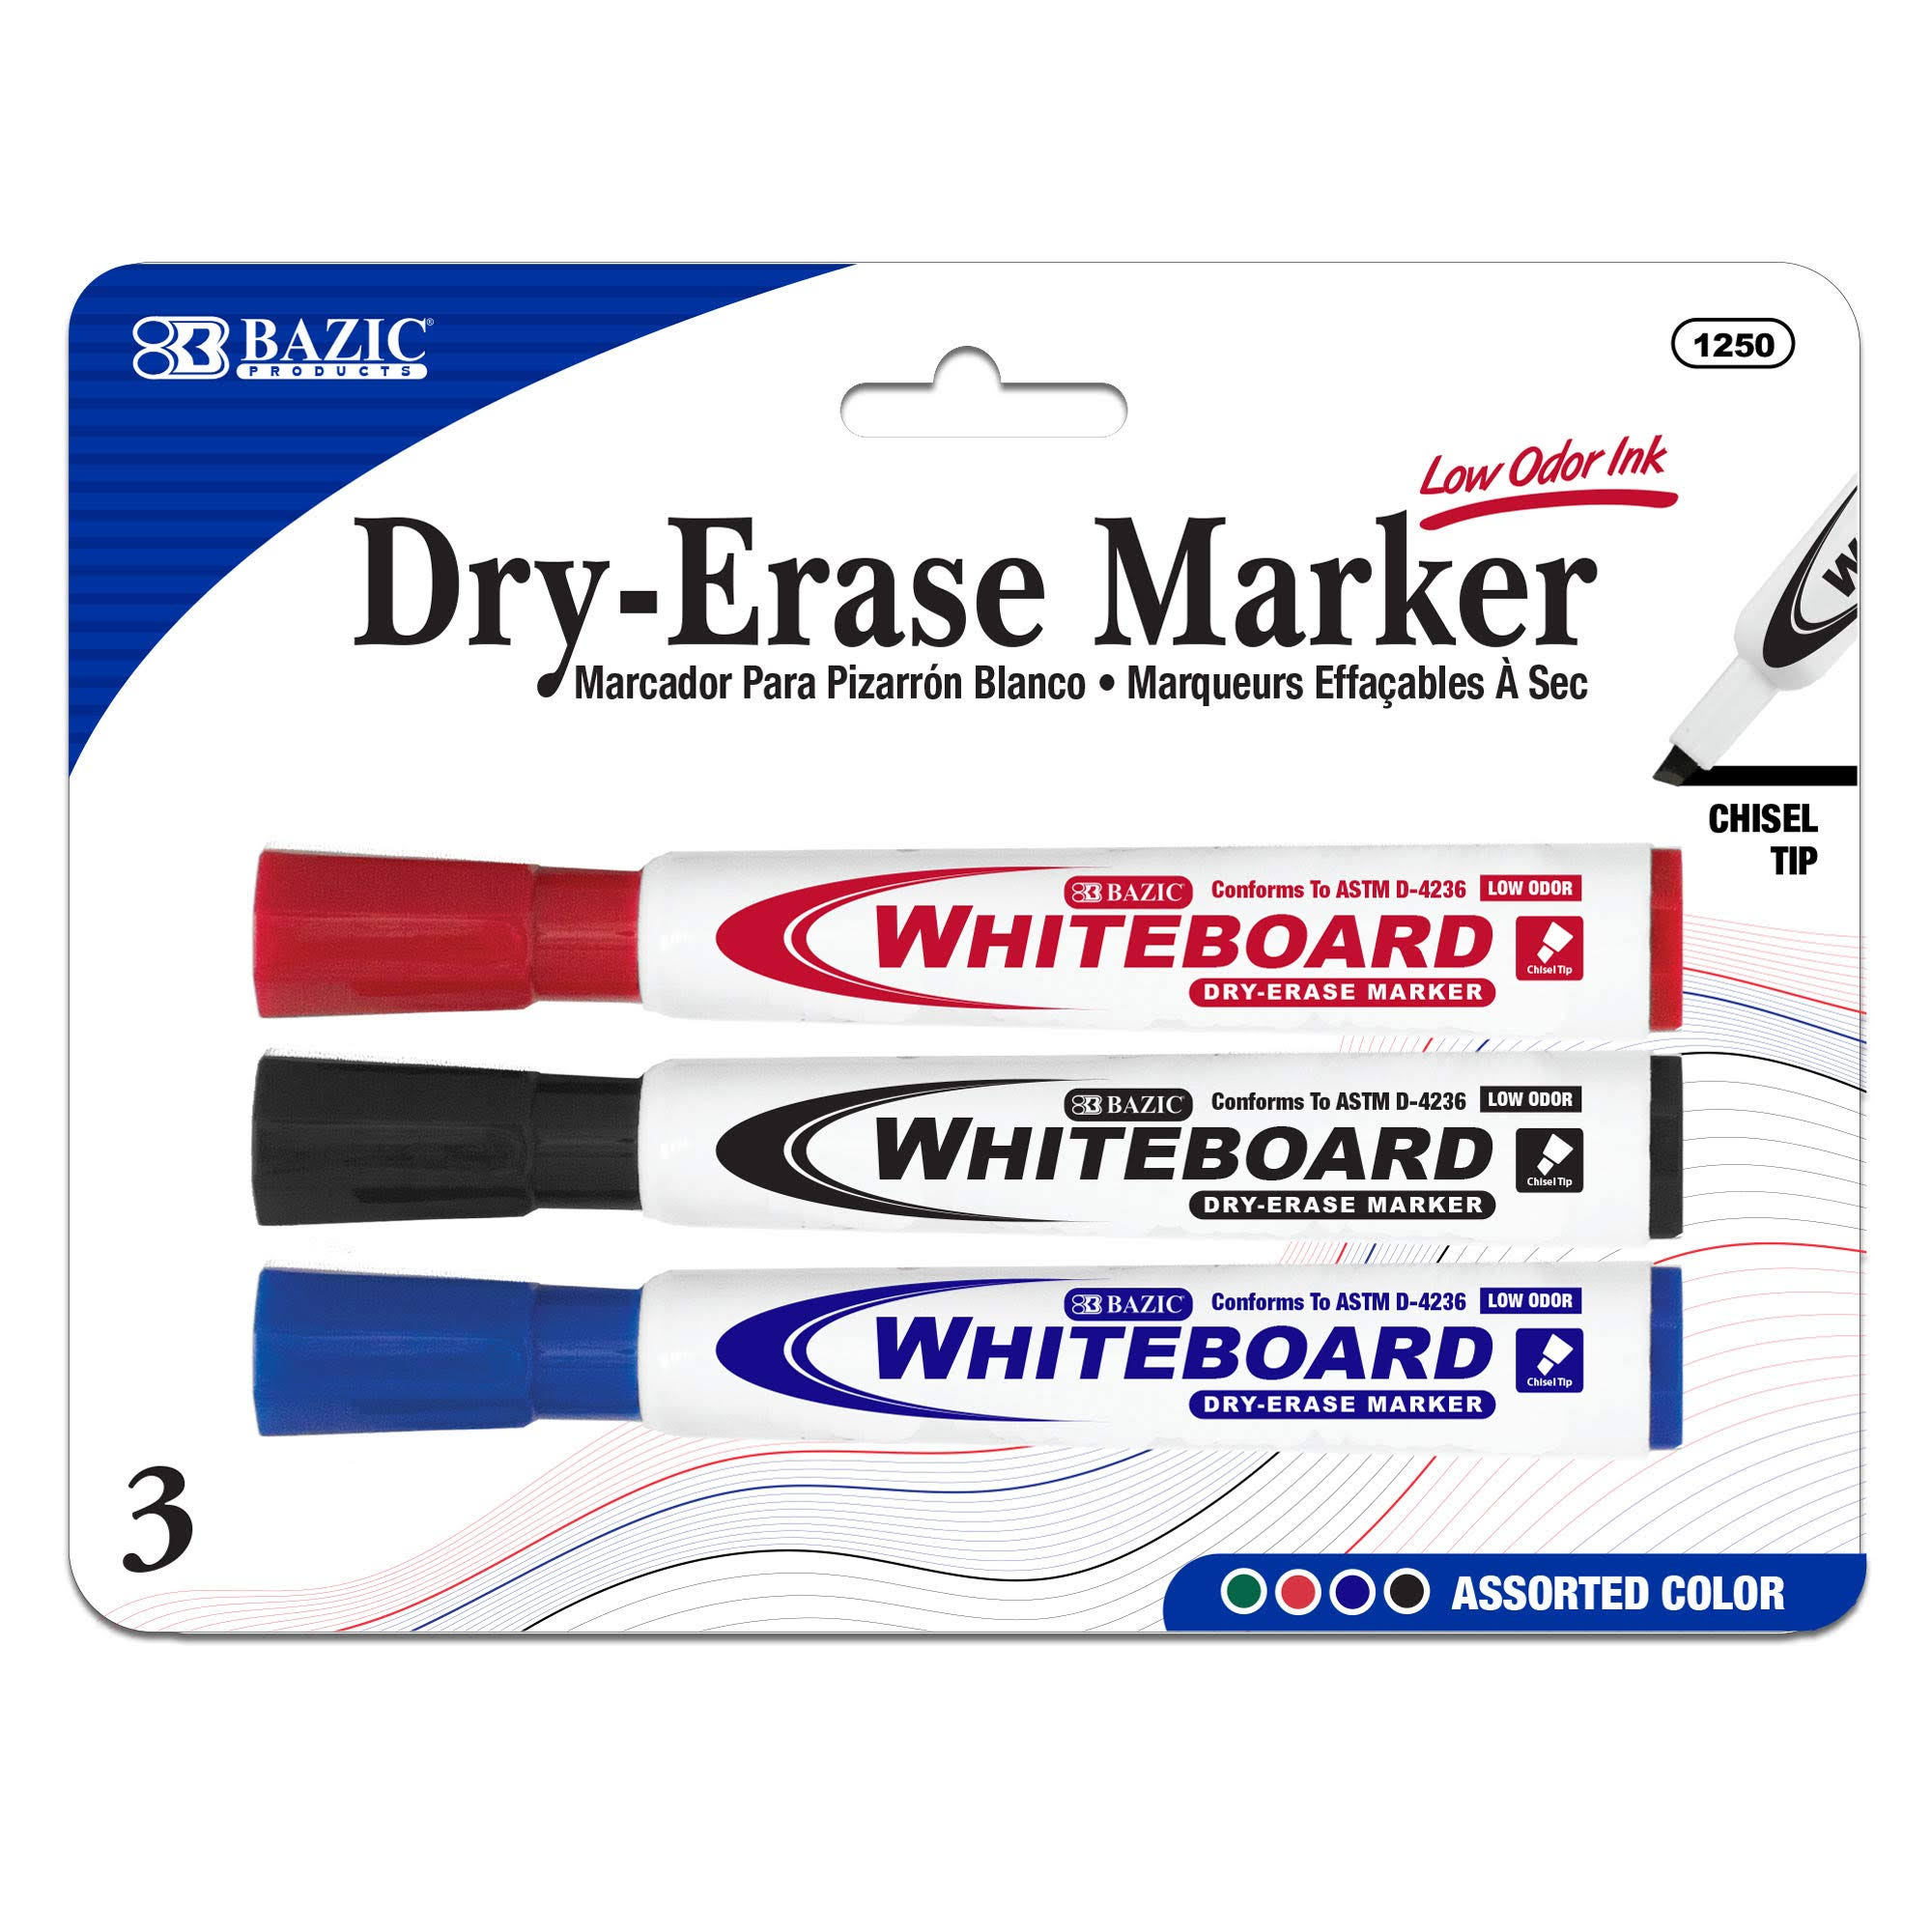 Bazic Chisel Tip Dry-Erase Whiteboard Markers - Assorted Color, x3